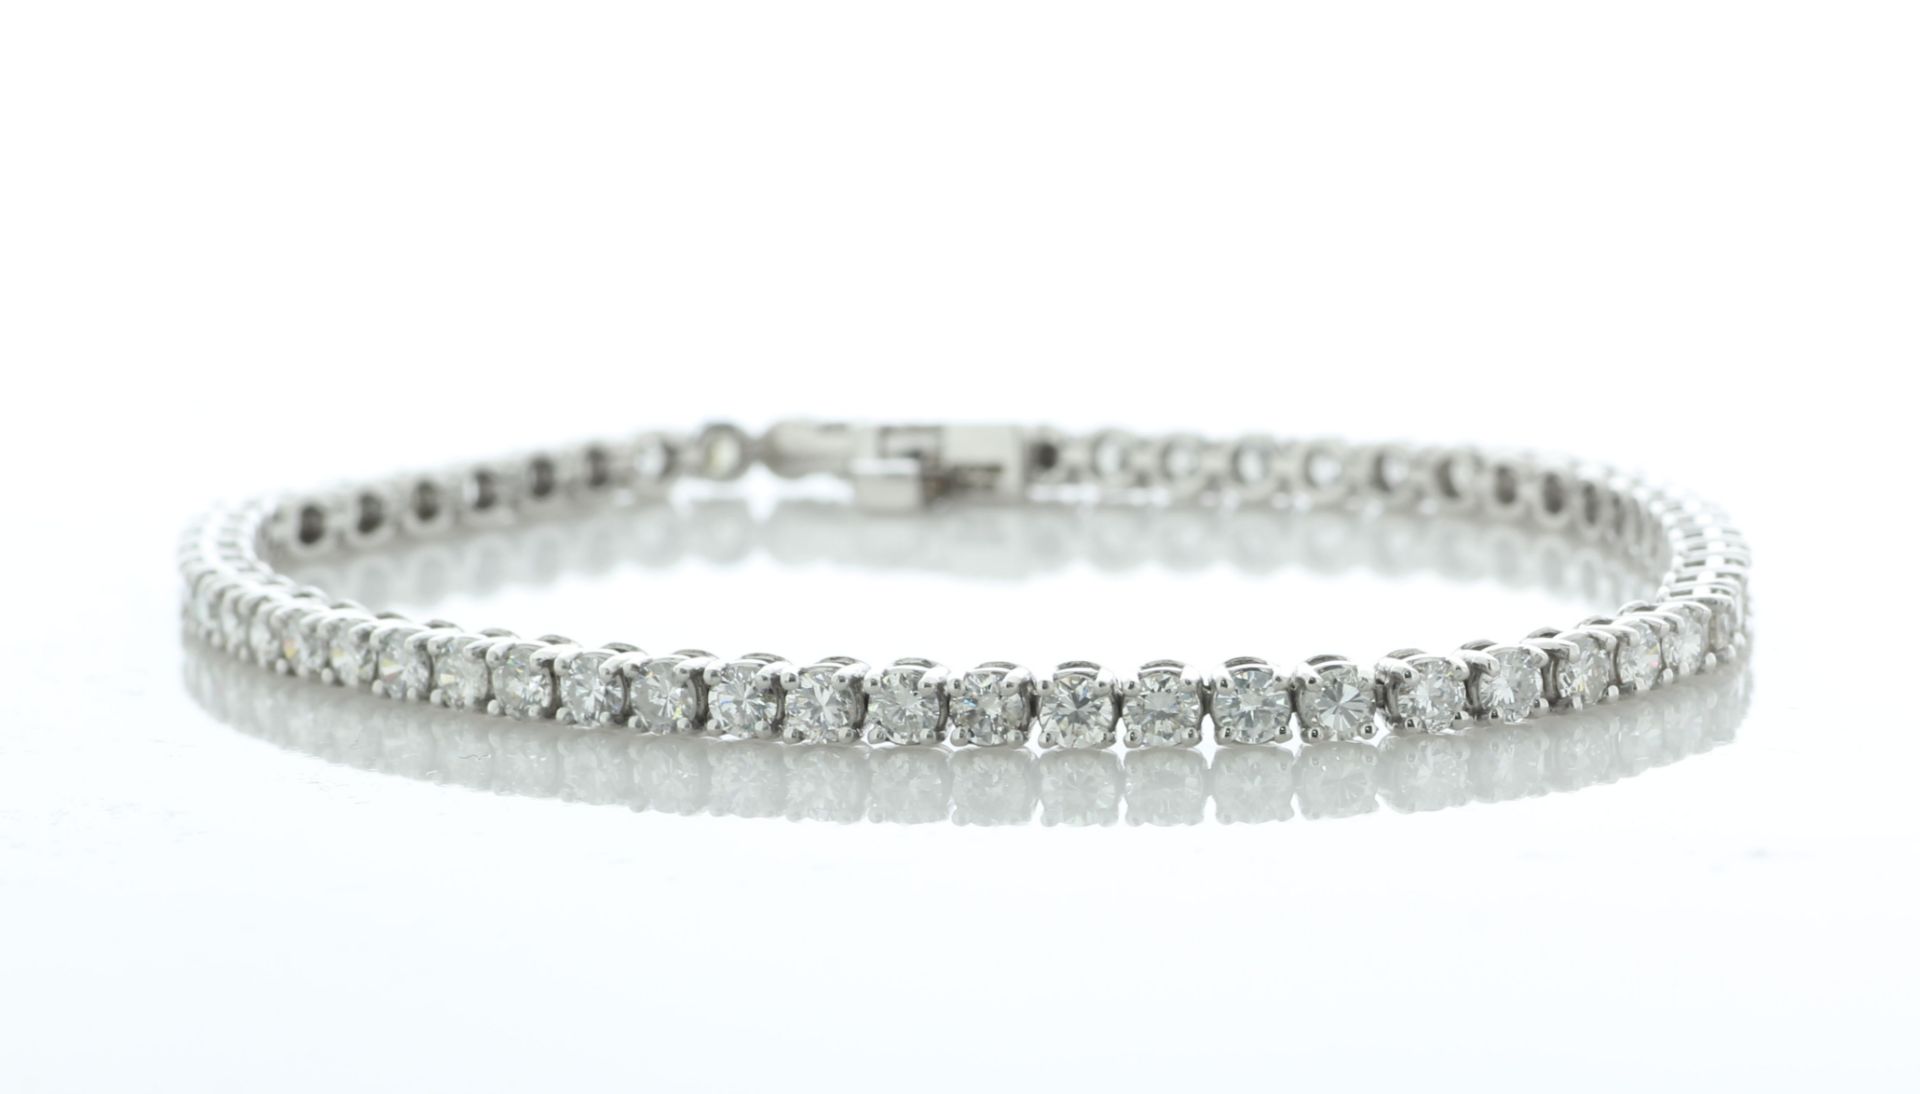 18ct White Gold Tennis Diamond Bracelet 4.60 Carats - Valued By IDI £17,365.00 - Fifty eight round